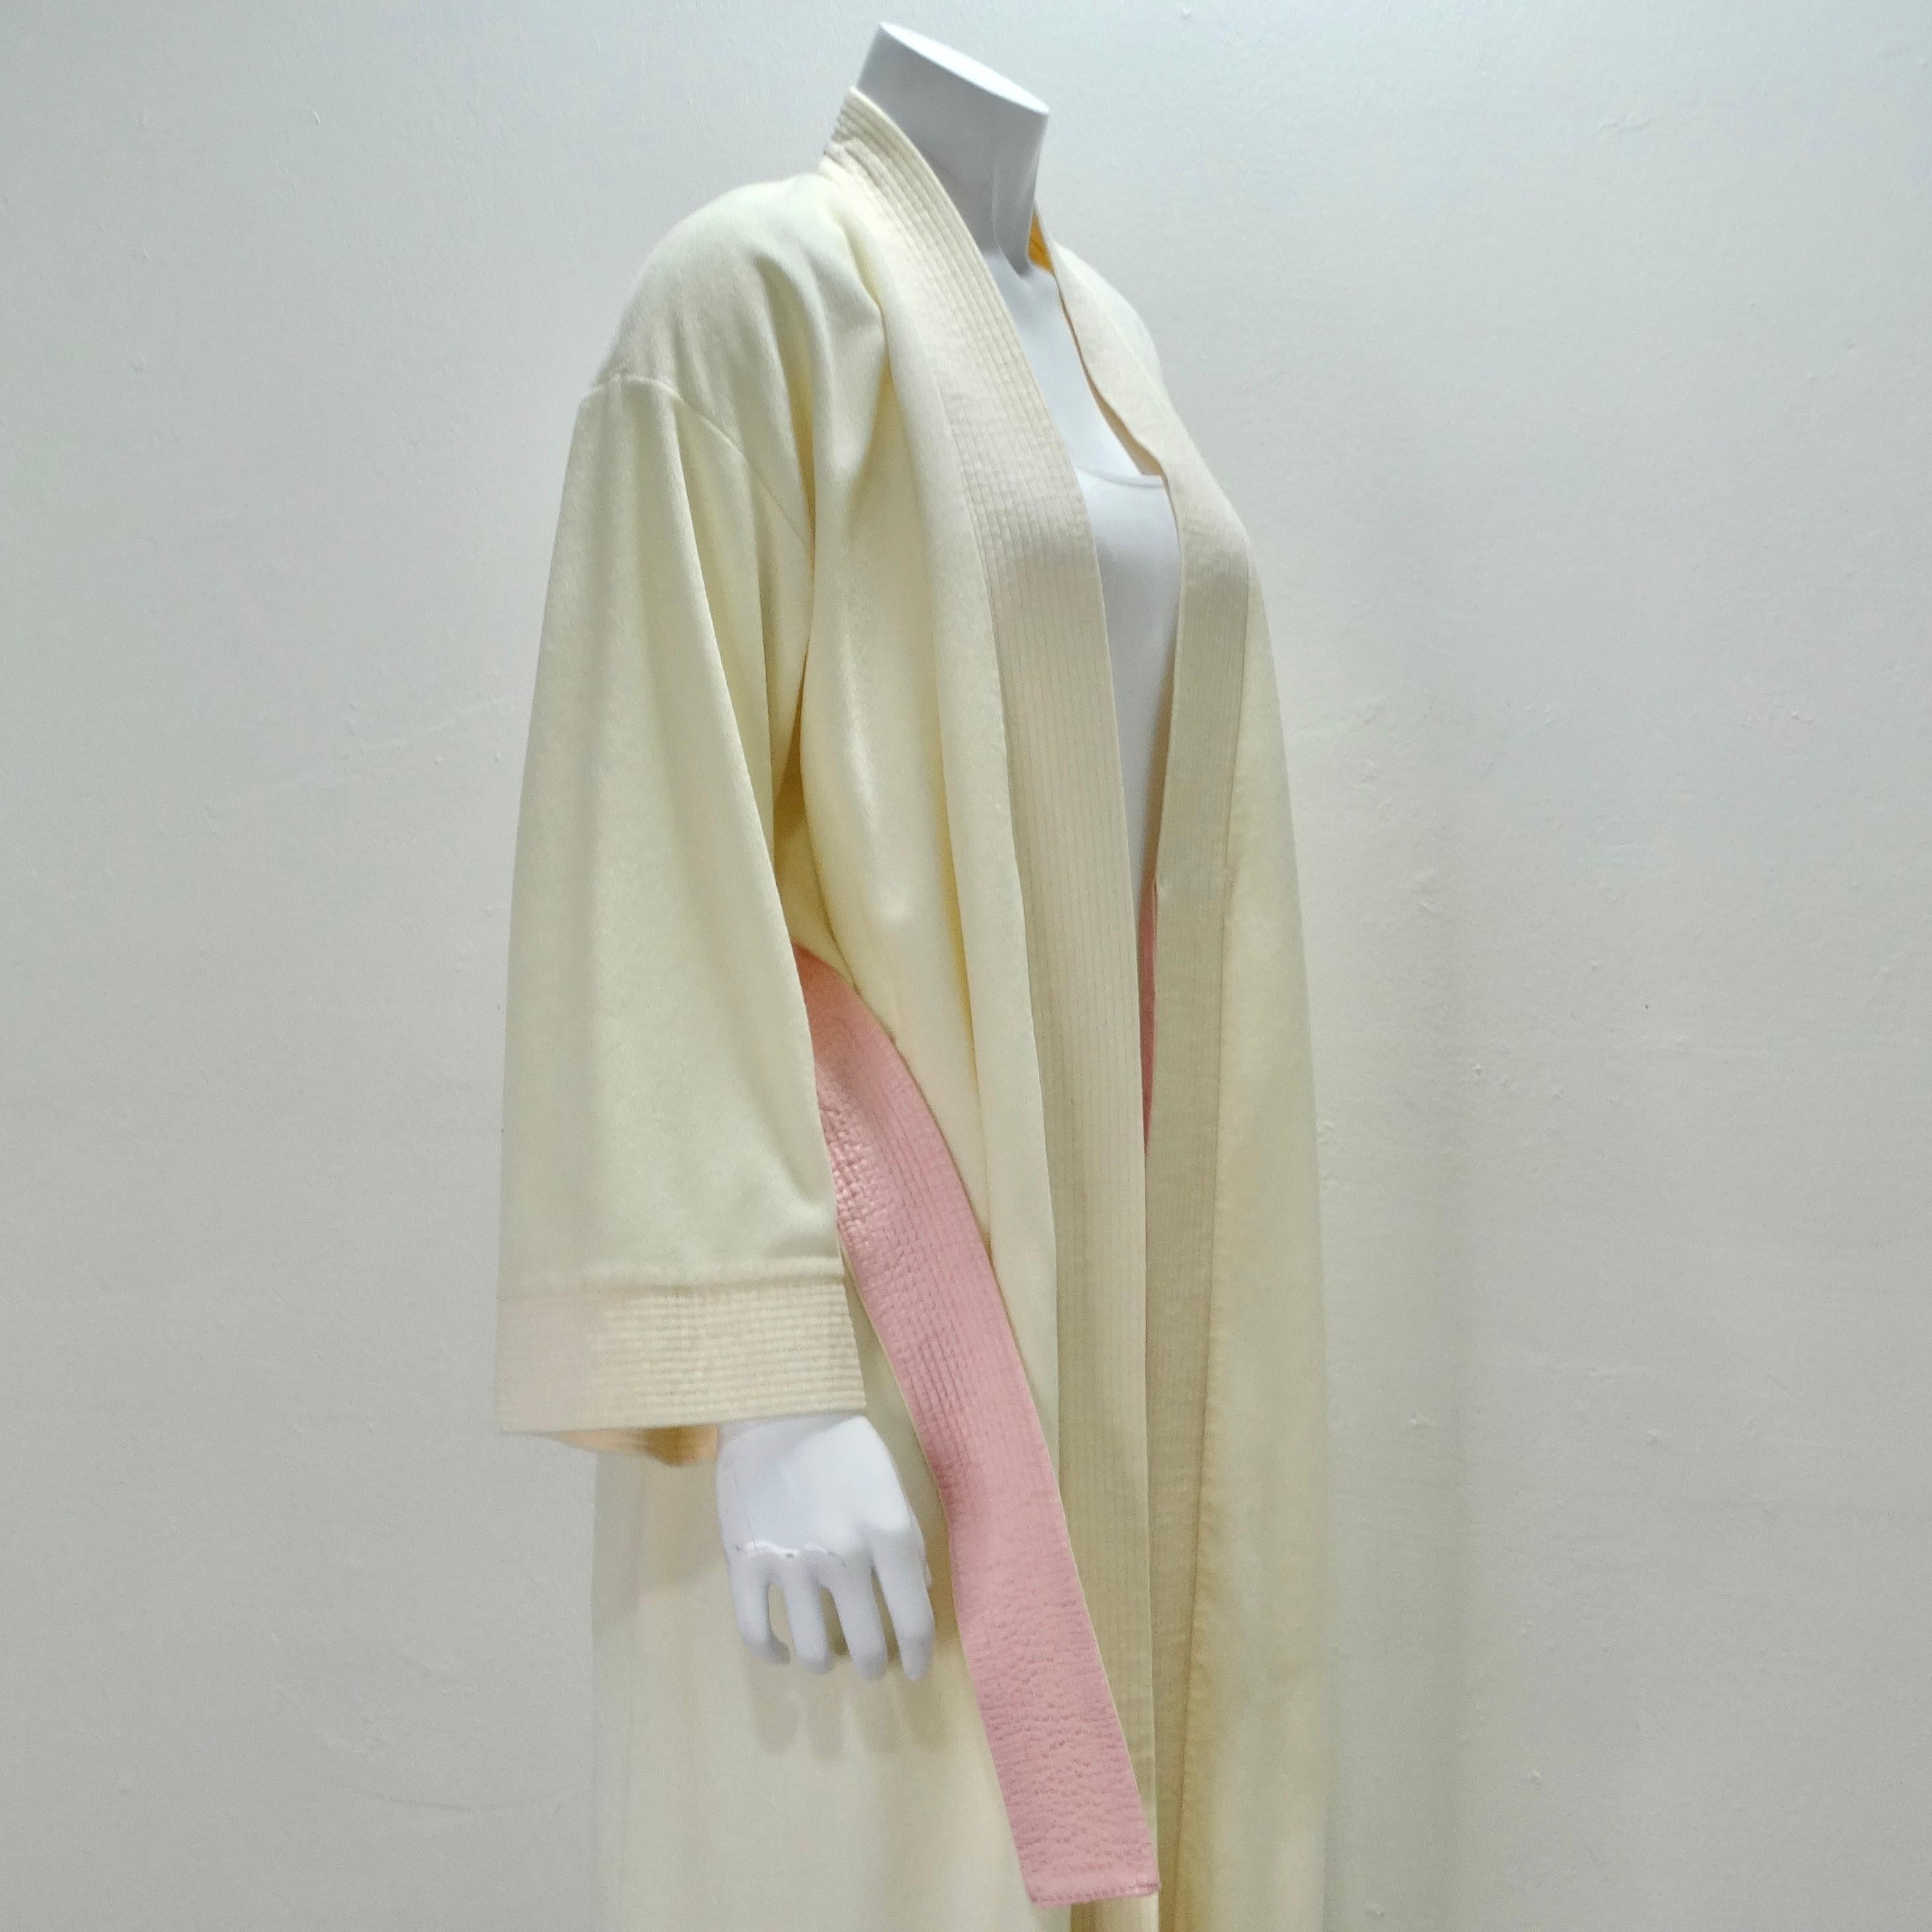 Bill Tice 1980s Lotus Flower Robe For Sale 3